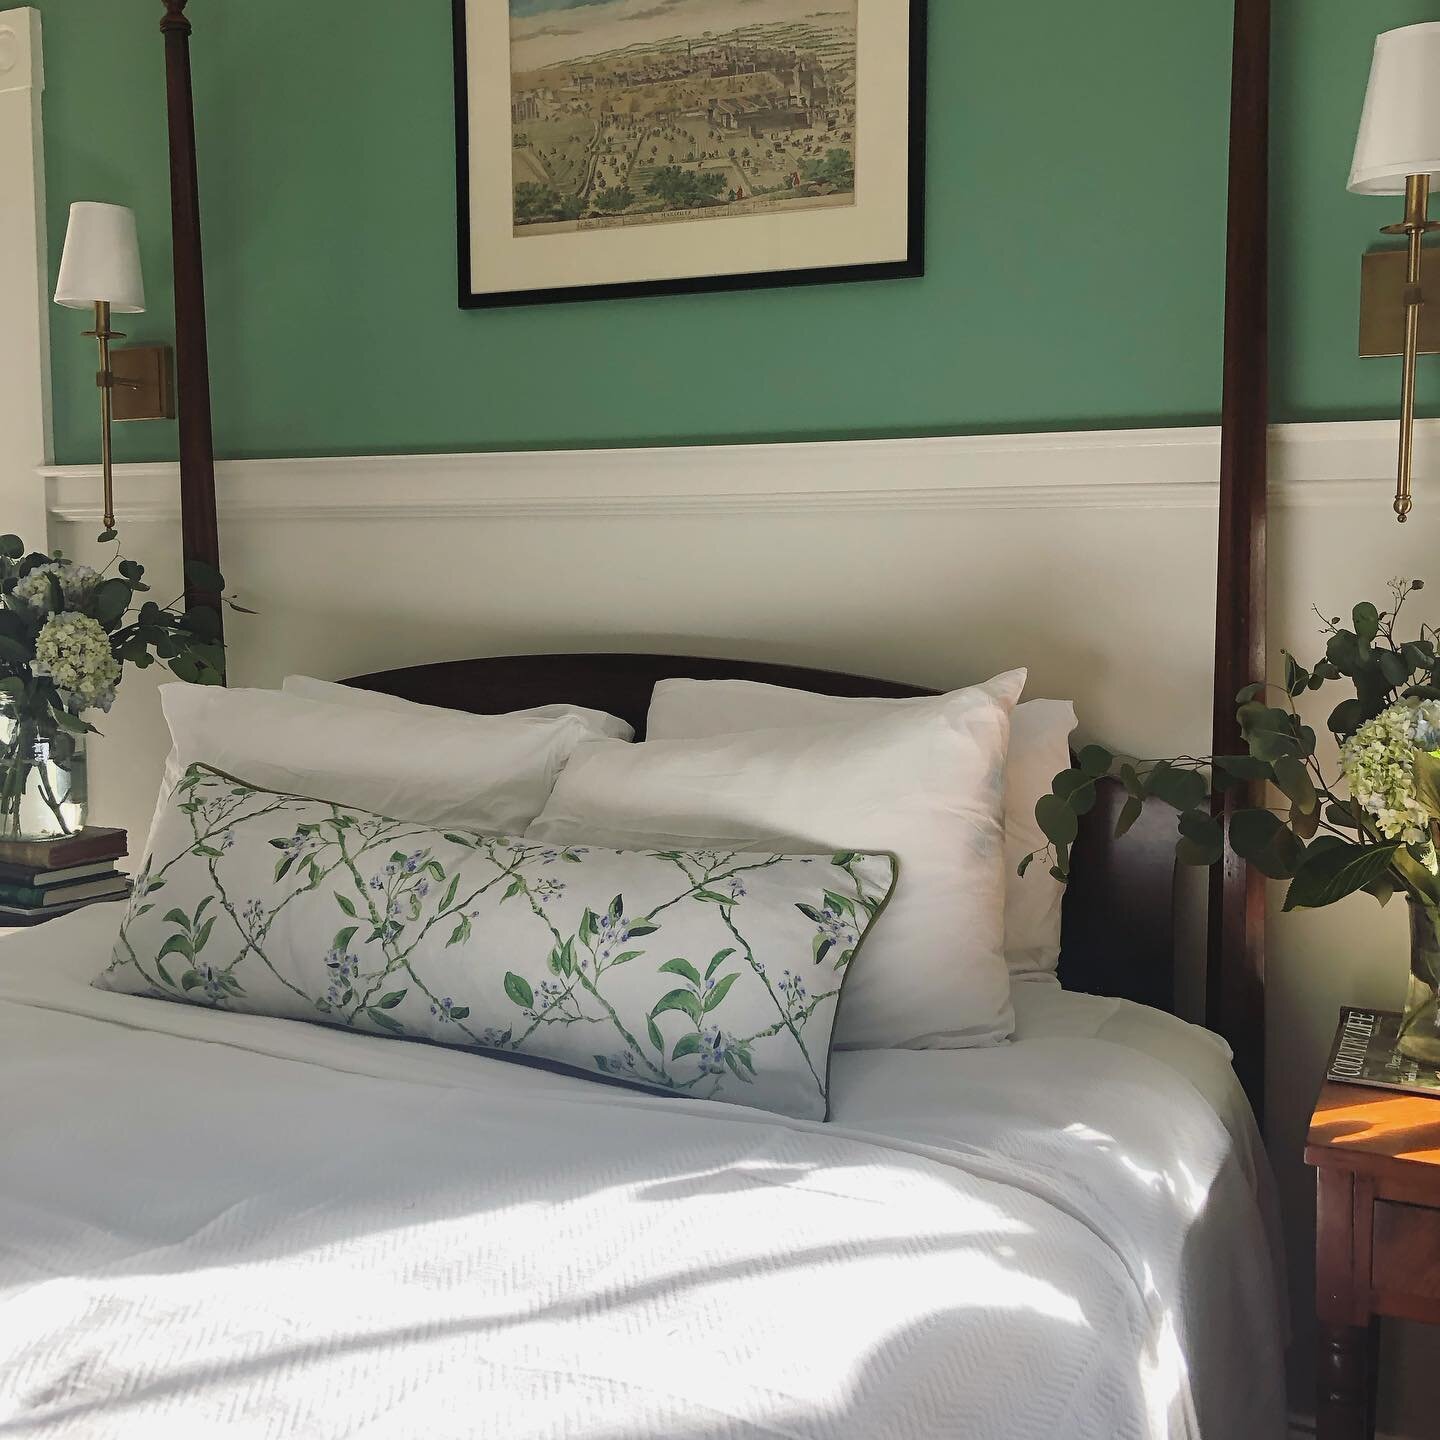 Happy Friday! From my Trellis Lumbar pillow, sitting pretty in this guest room 🌱. #learutledgetextiles #botanicalprints #floralpillow #boutiquefabric #guestroominspo #fabricartist #printedlinen #historichome #fourposterbed